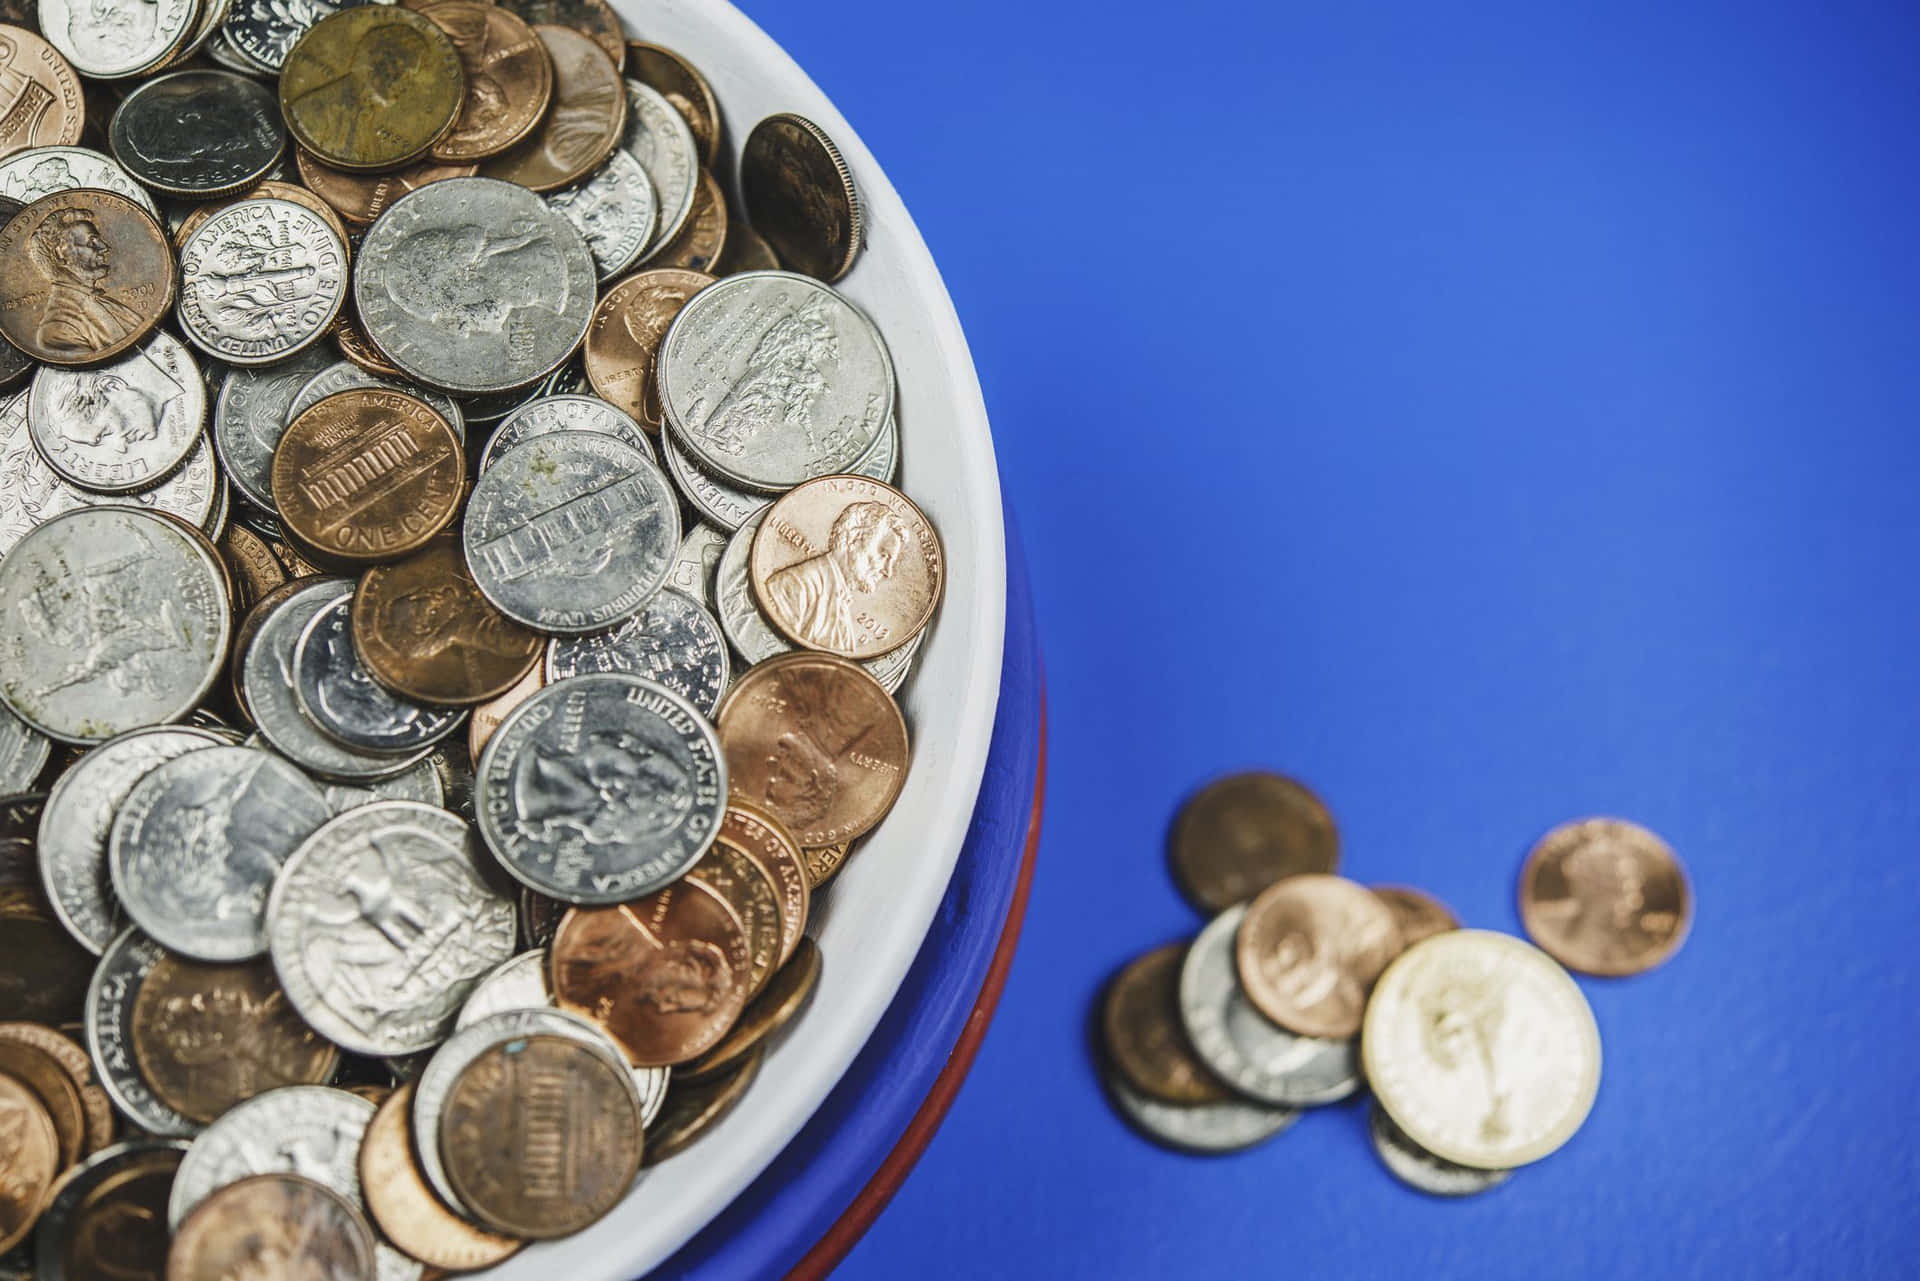 A Bowl Of Coins On A Blue Background